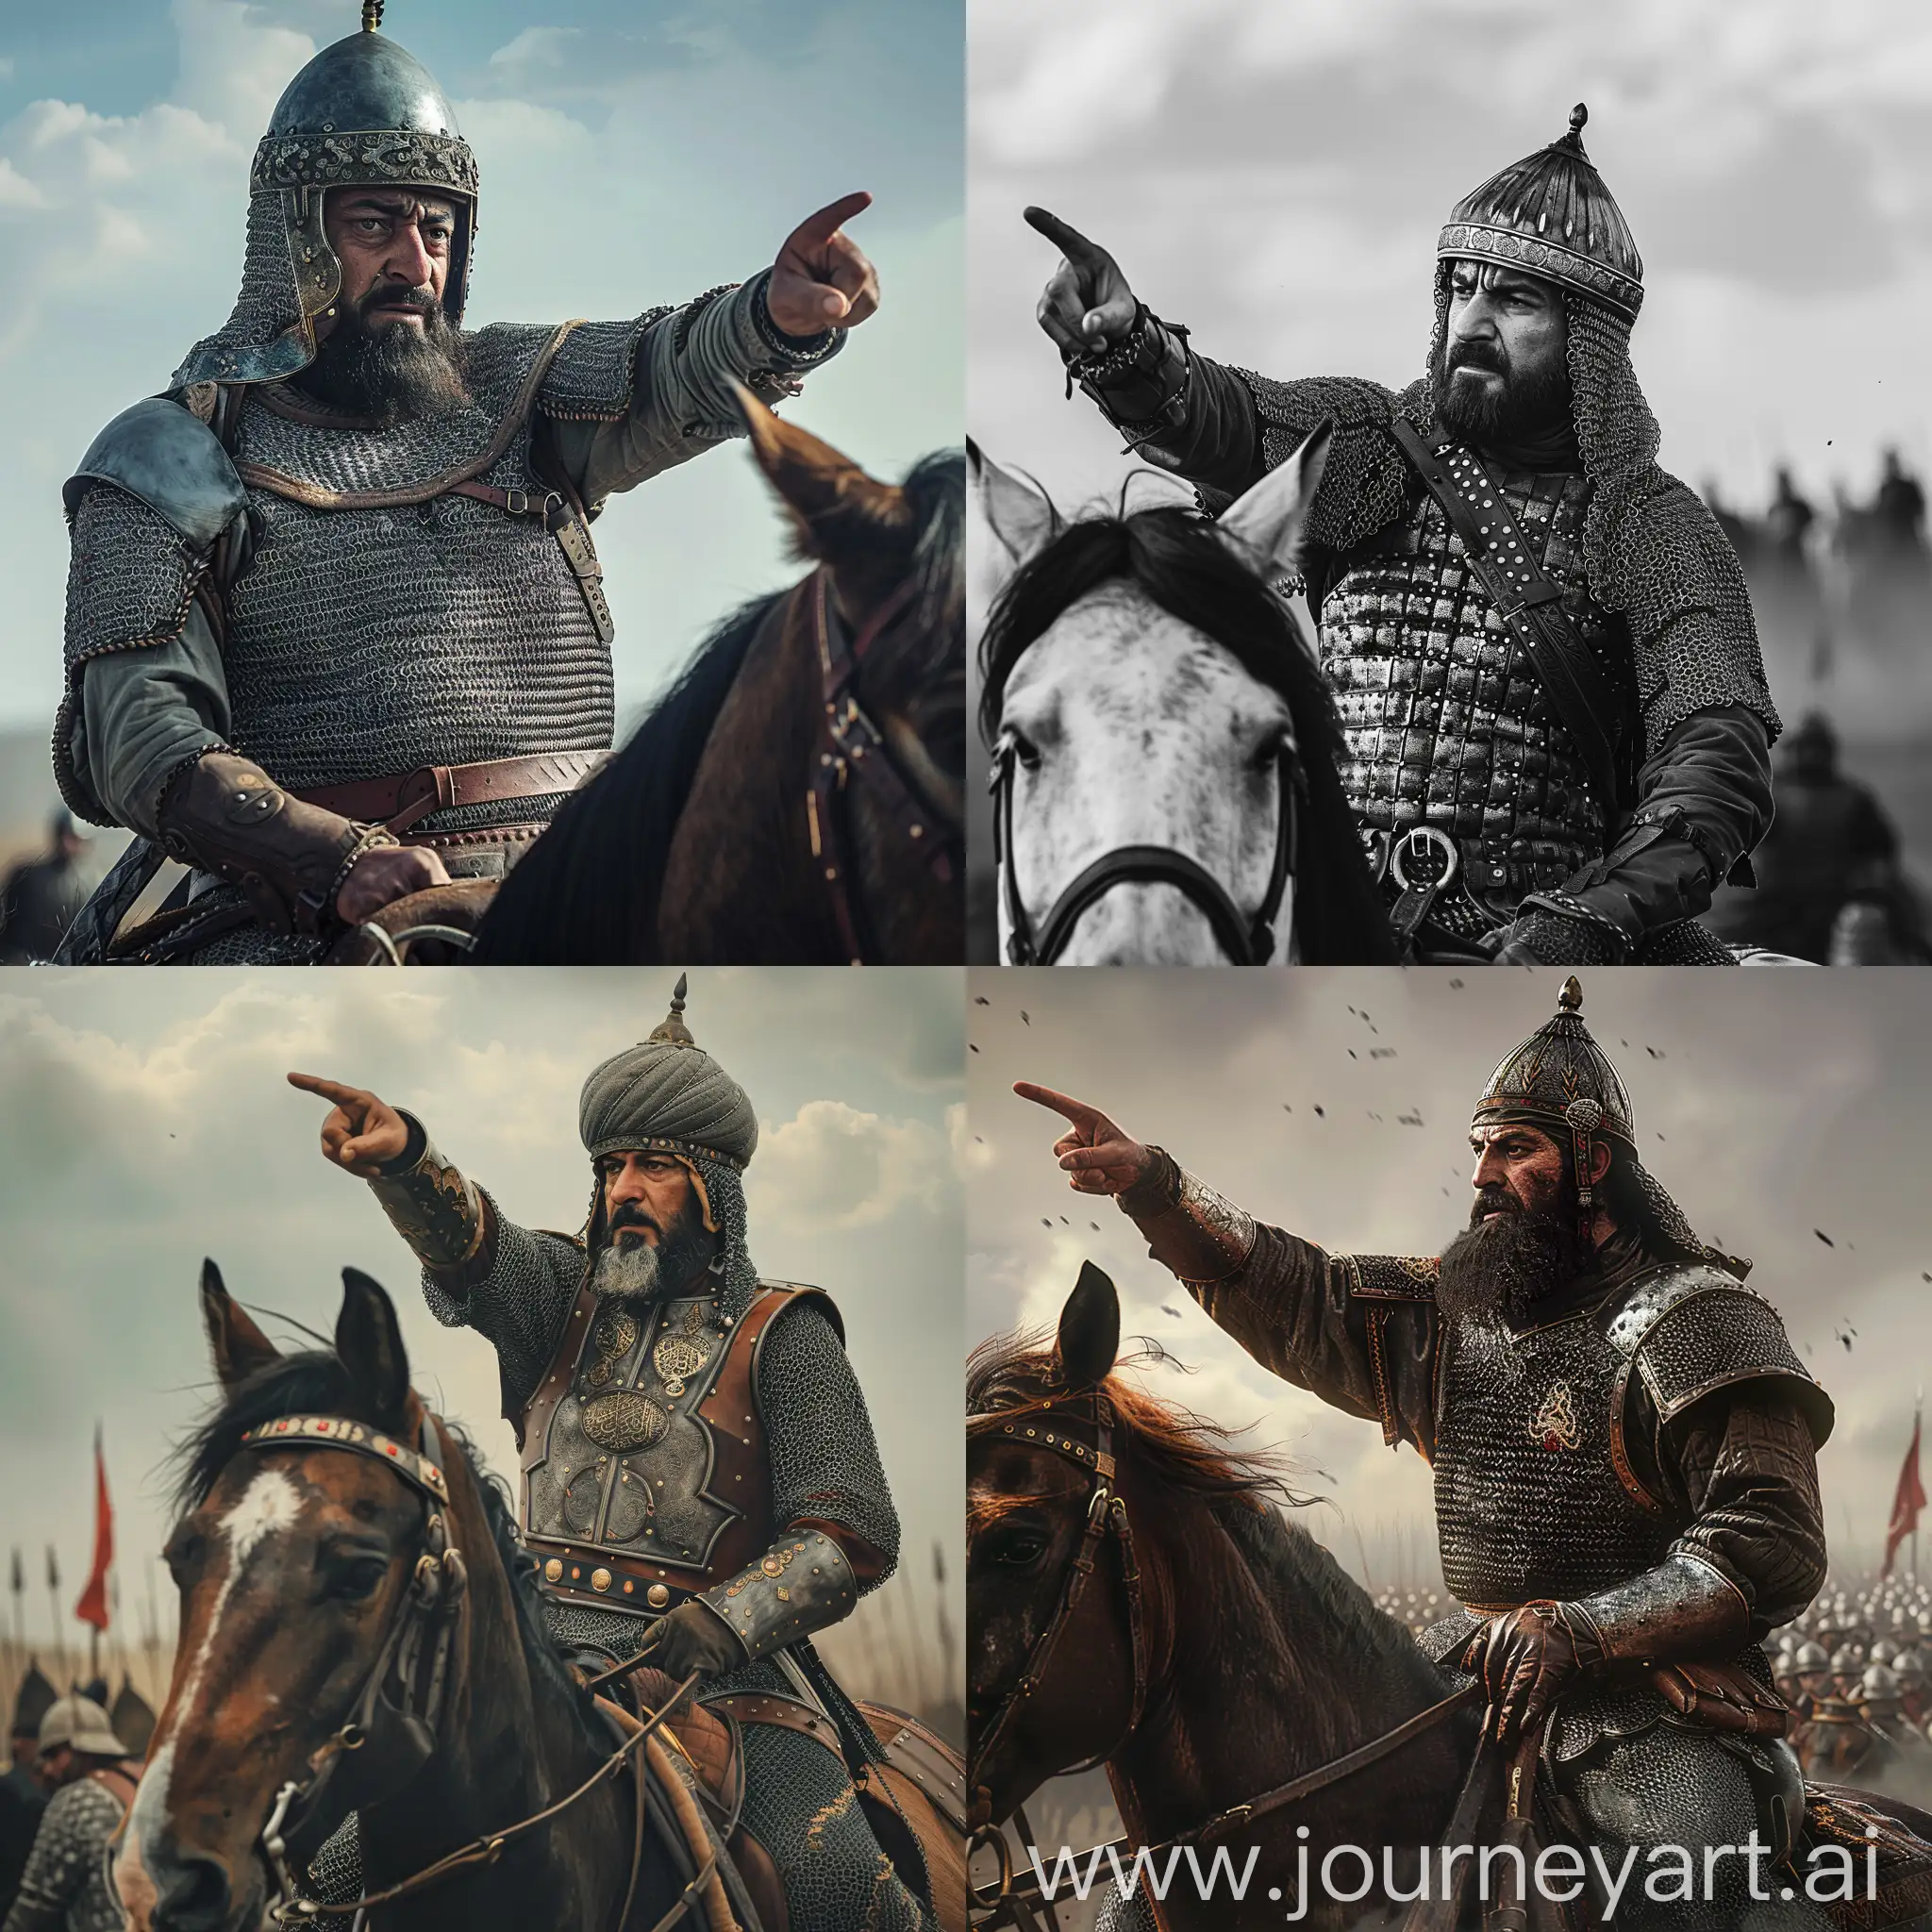 Ottoman Sultan Mehmed the Conqueror on his horse at battle field. He is depicted in chainmail armor and Islamic helmet. Pointing far with his finger. Average beard. Cinematic image.